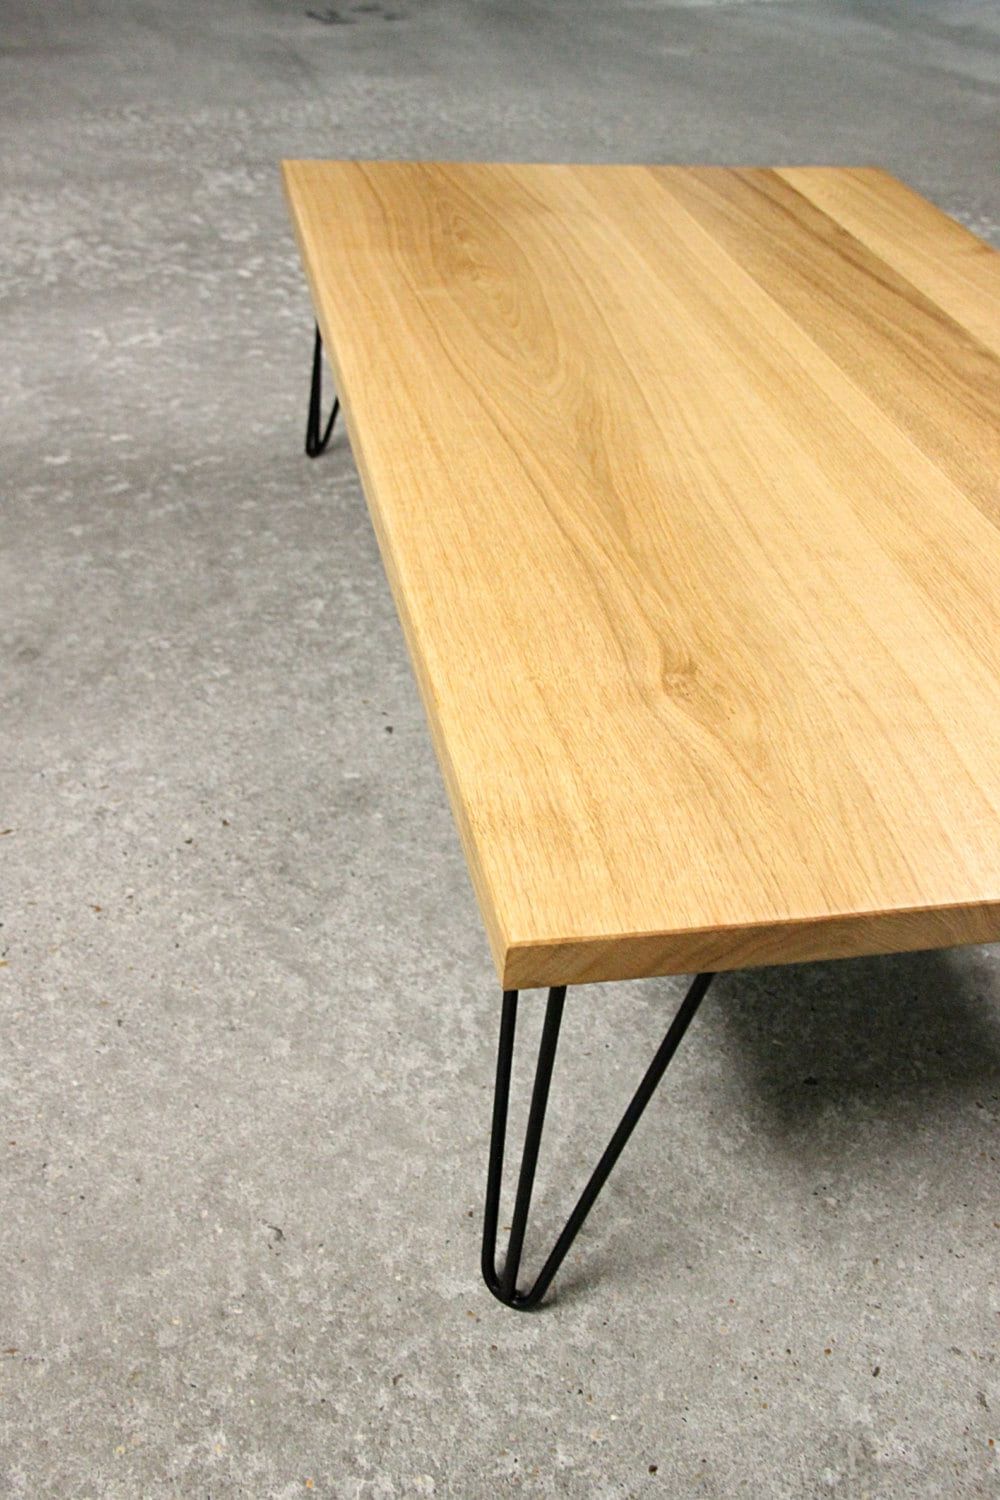 Oak Wood And Metal Legs Coffee Tables With Trendy Solid Oak Coffee Table On Hairpin Legs (View 9 of 20)